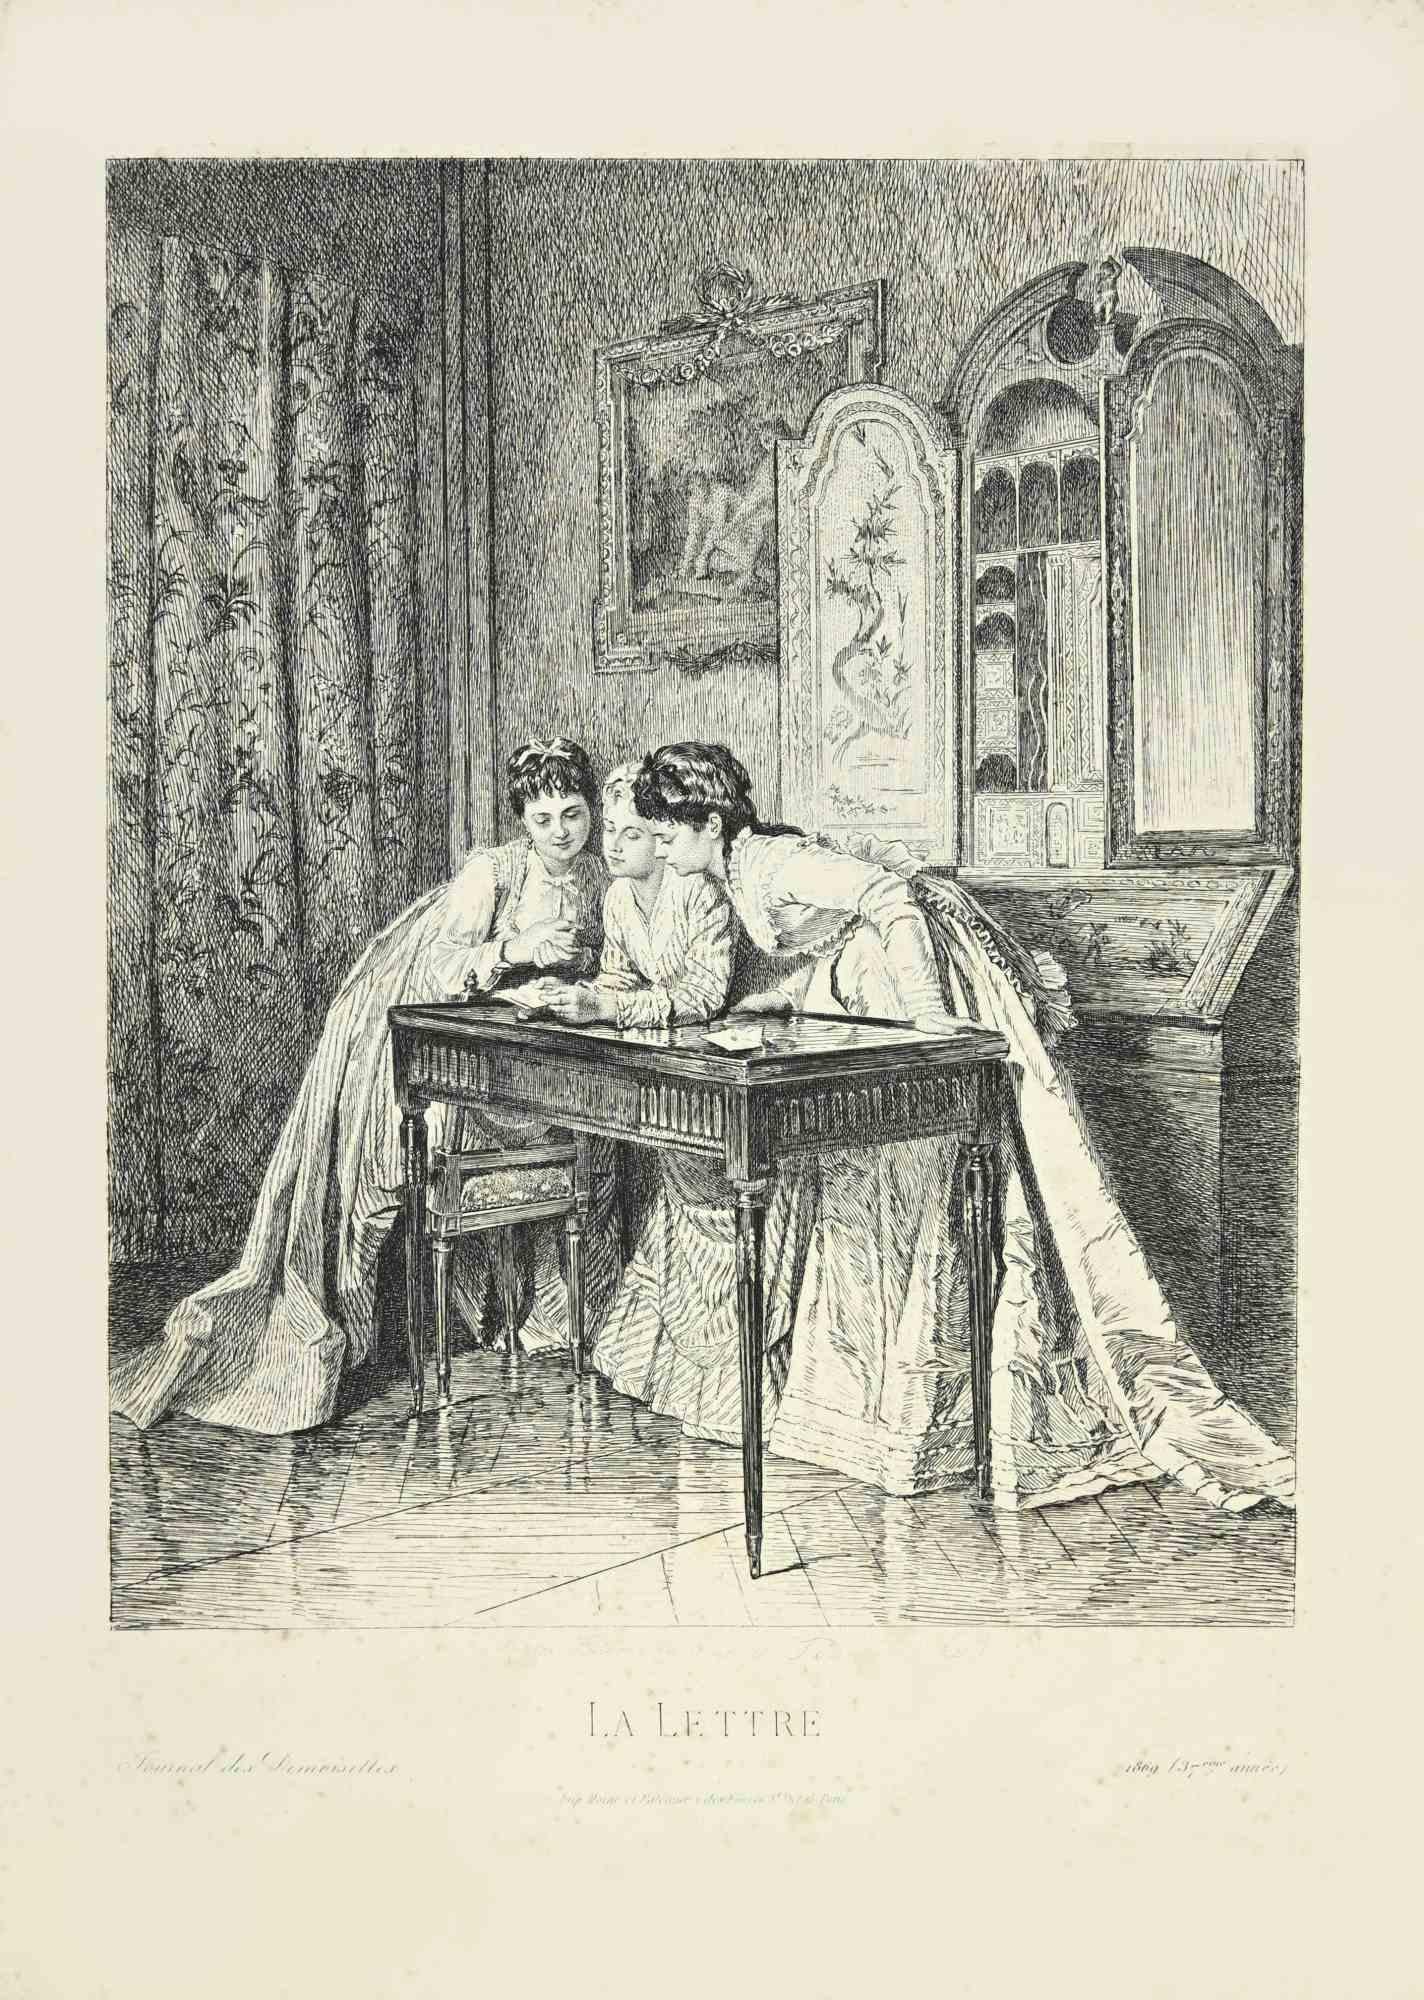 La Lettre  is a print, realized in  1869  by  Léopold Flameng .

Etching on paper. Signed on plate, titled and dated. Printed by Moine et Falconer, Paris.